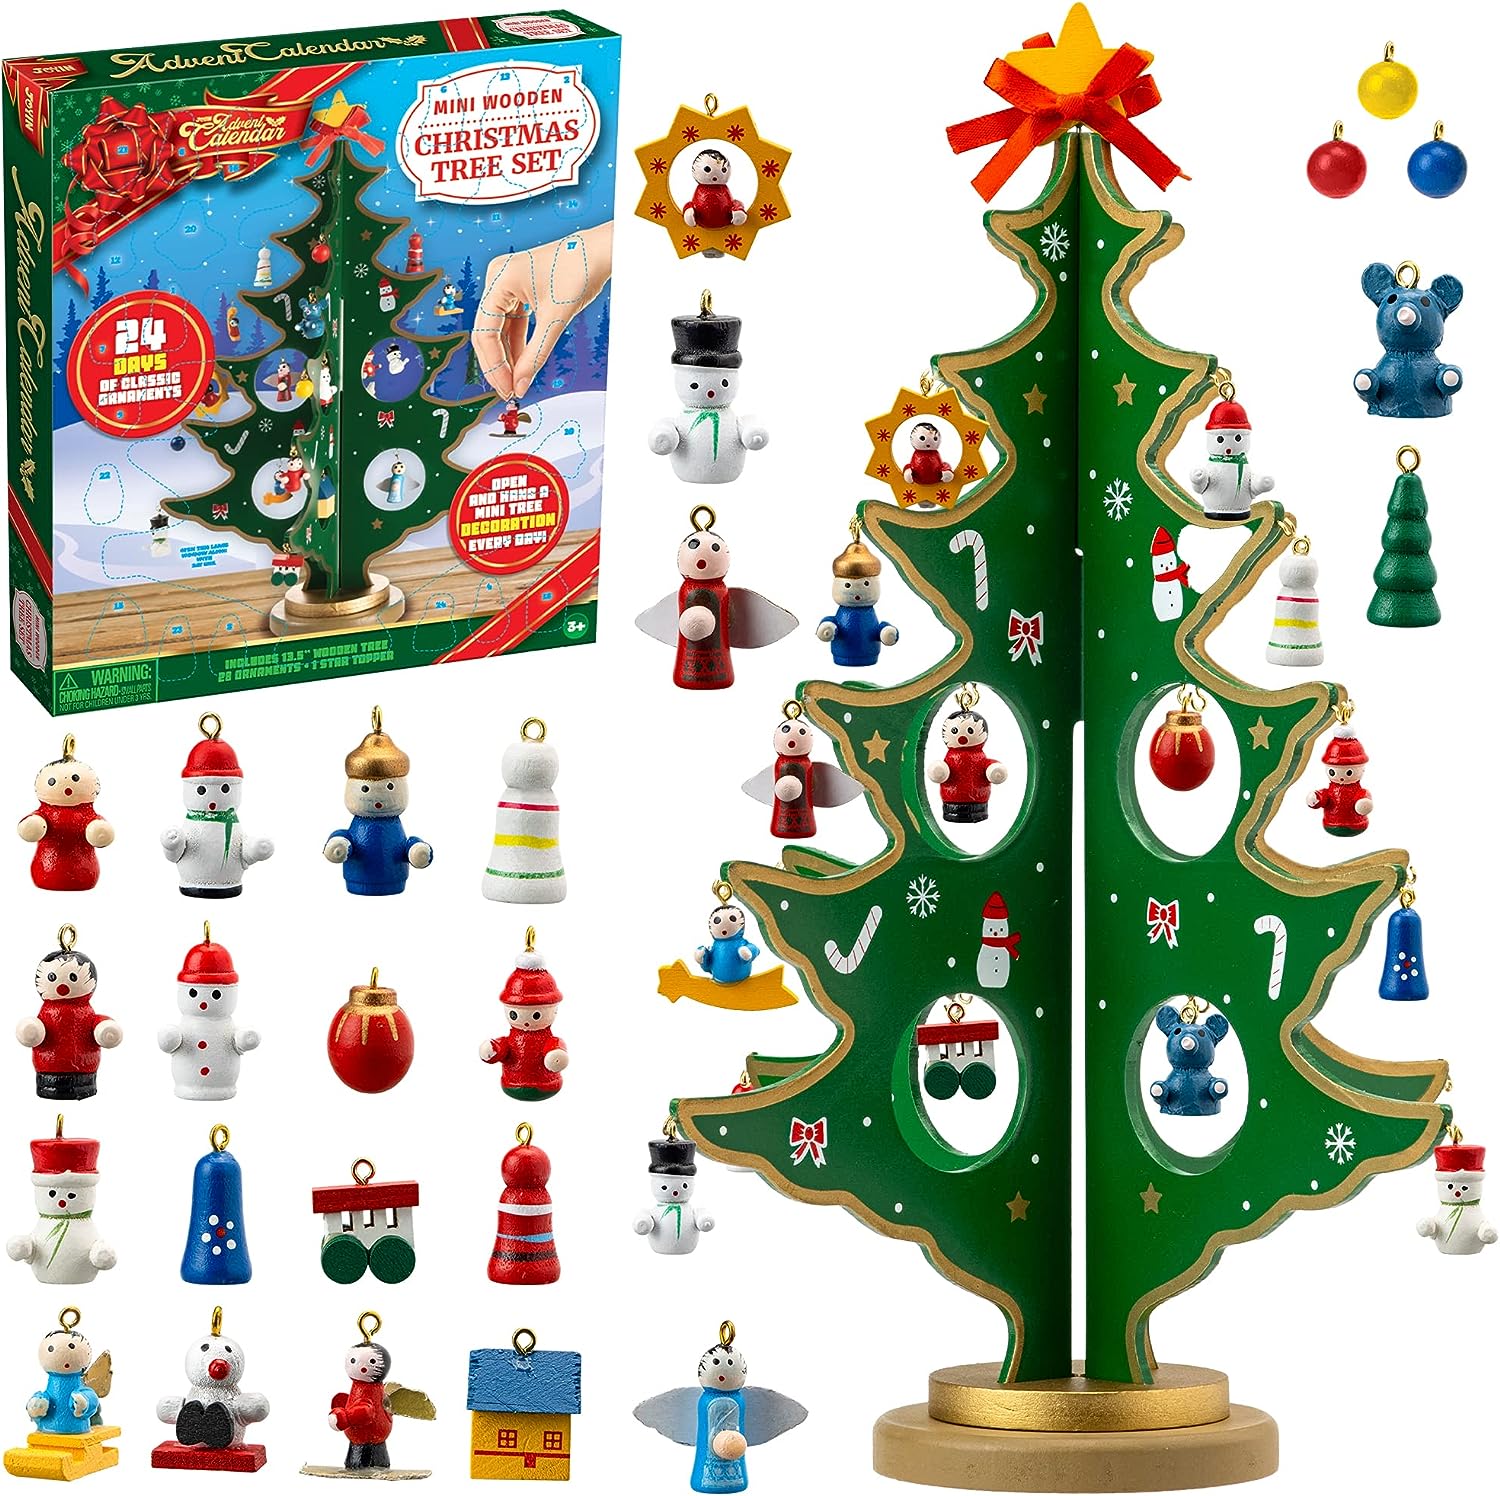 Christmas 24 Days Countdown Advent Calendar with a Tabletop Wooden Christmas Tree and 28 Ornaments Snowman Santa Decorations for Boys, Girls and Kids Party Favors Gift